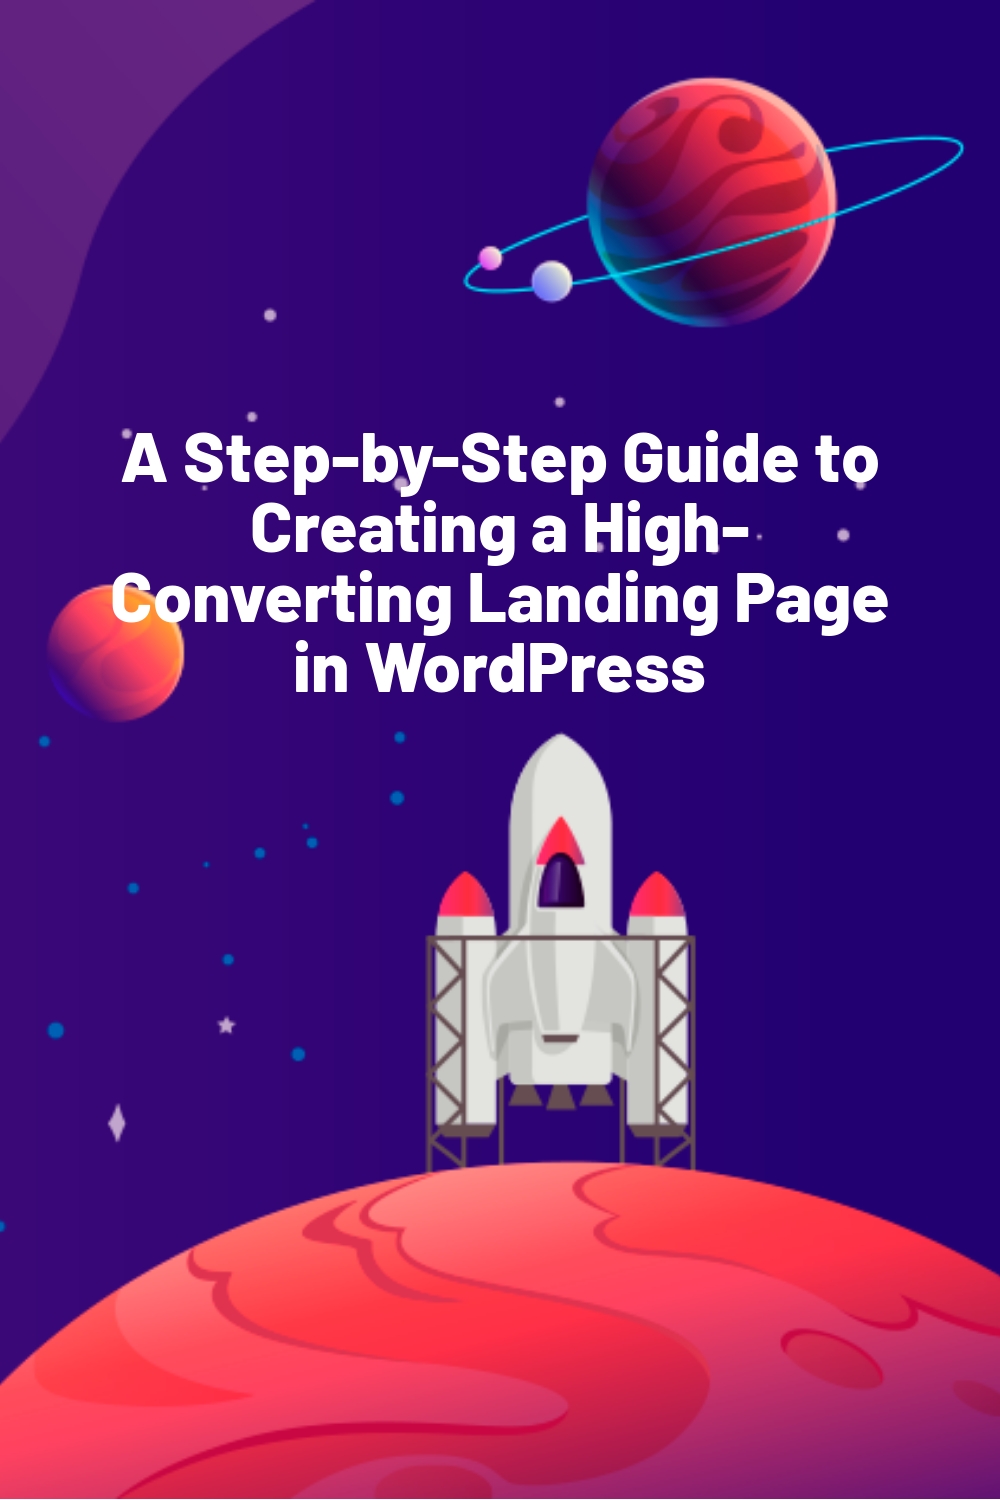 A Step-by-Step Guide to Creating a High-Converting Landing Page in WordPress